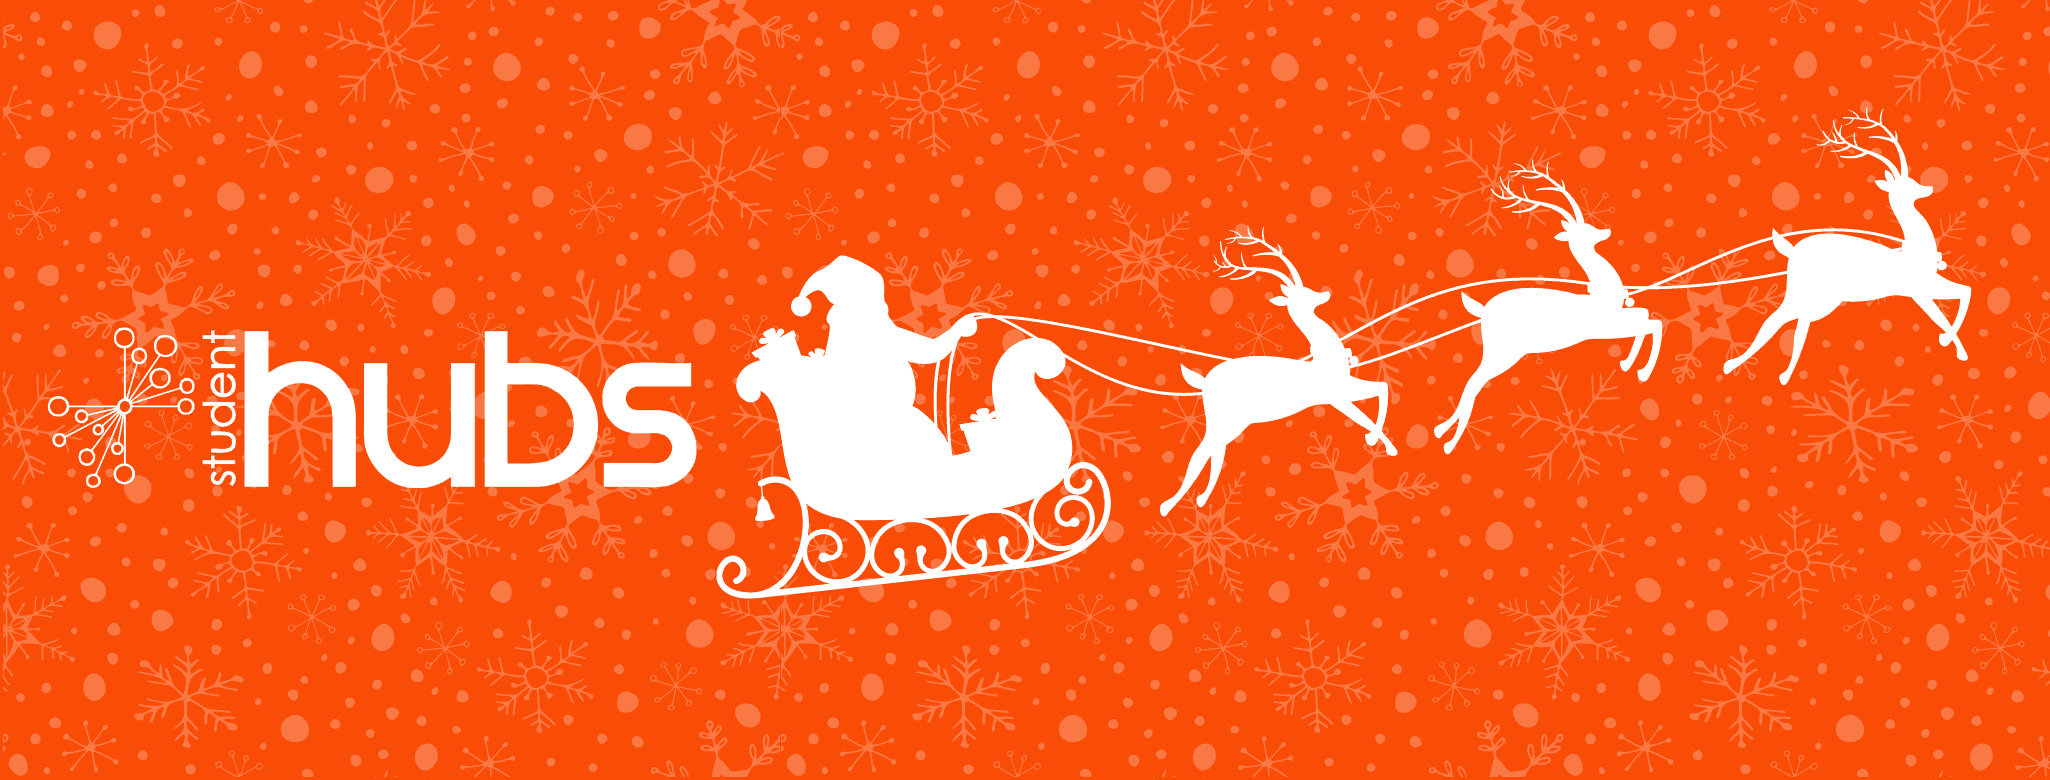 A orange banner with the student hubs logo and an outline of santa on a sleigh with reindeers. The background has transparent snowflakes.